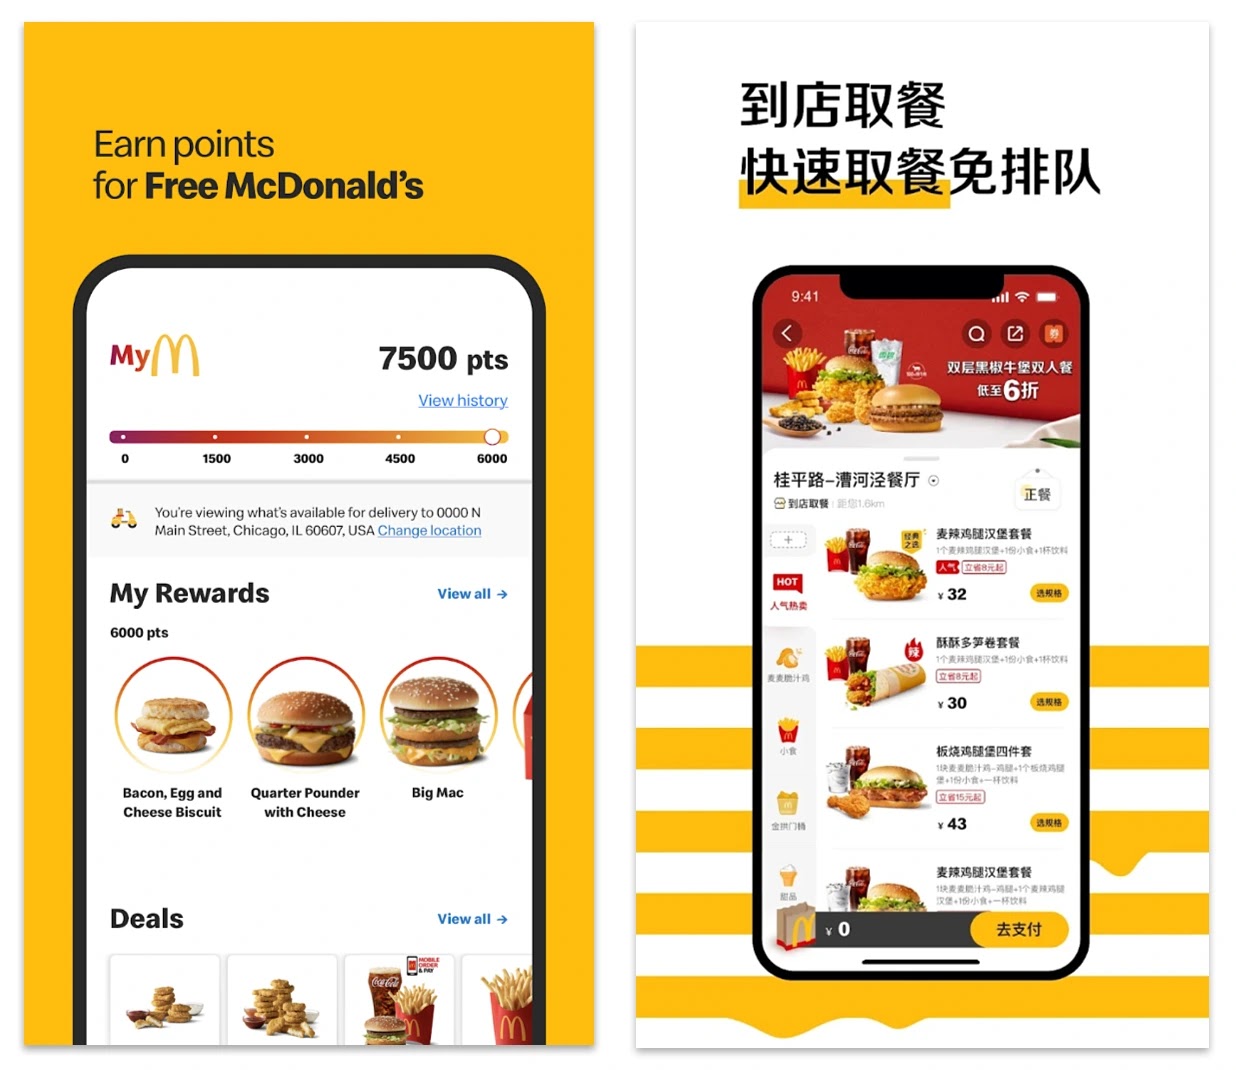 McDonald's app front in the U.S. (left) and China (right)